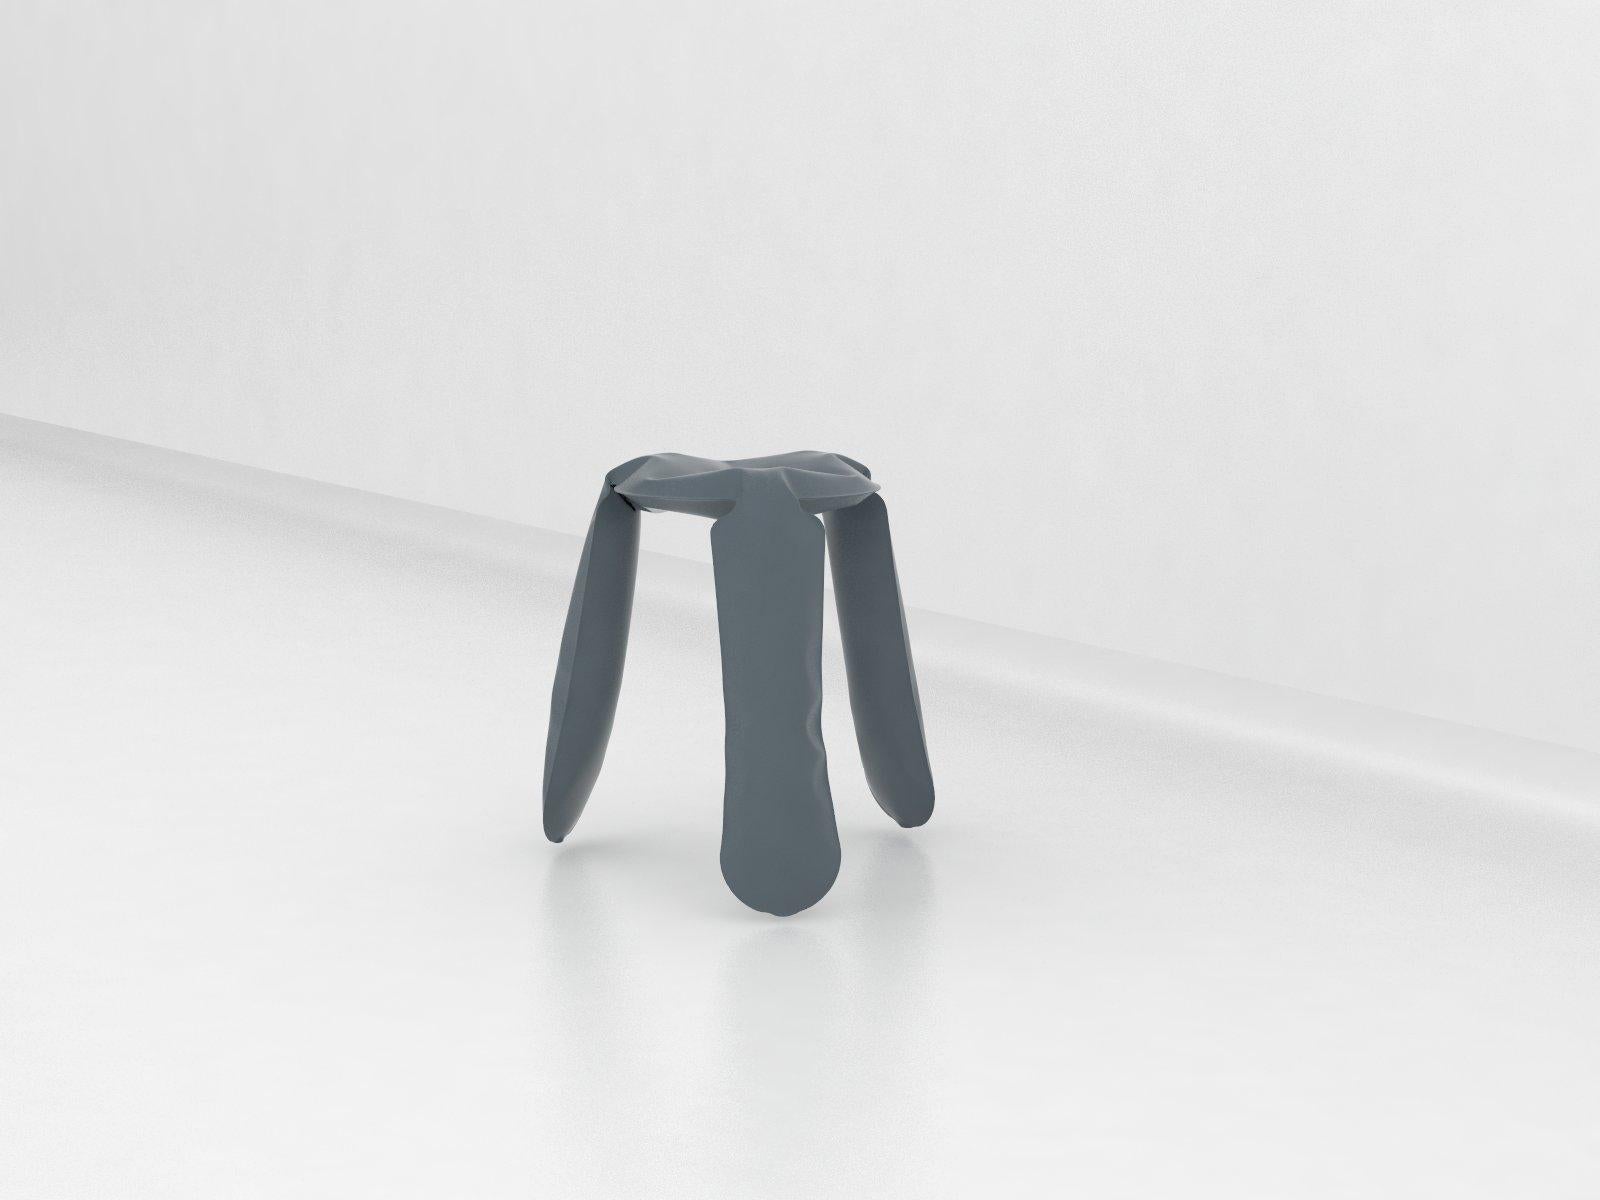 Plopp stool is an icon and a bestseller of Zieta Prozessdesign. The unique, toy-looking and playful shape of Plopp is an effect of an innovative forming method FIDU. FIDU technology means that two ultra-thin steel sheets are welded together around